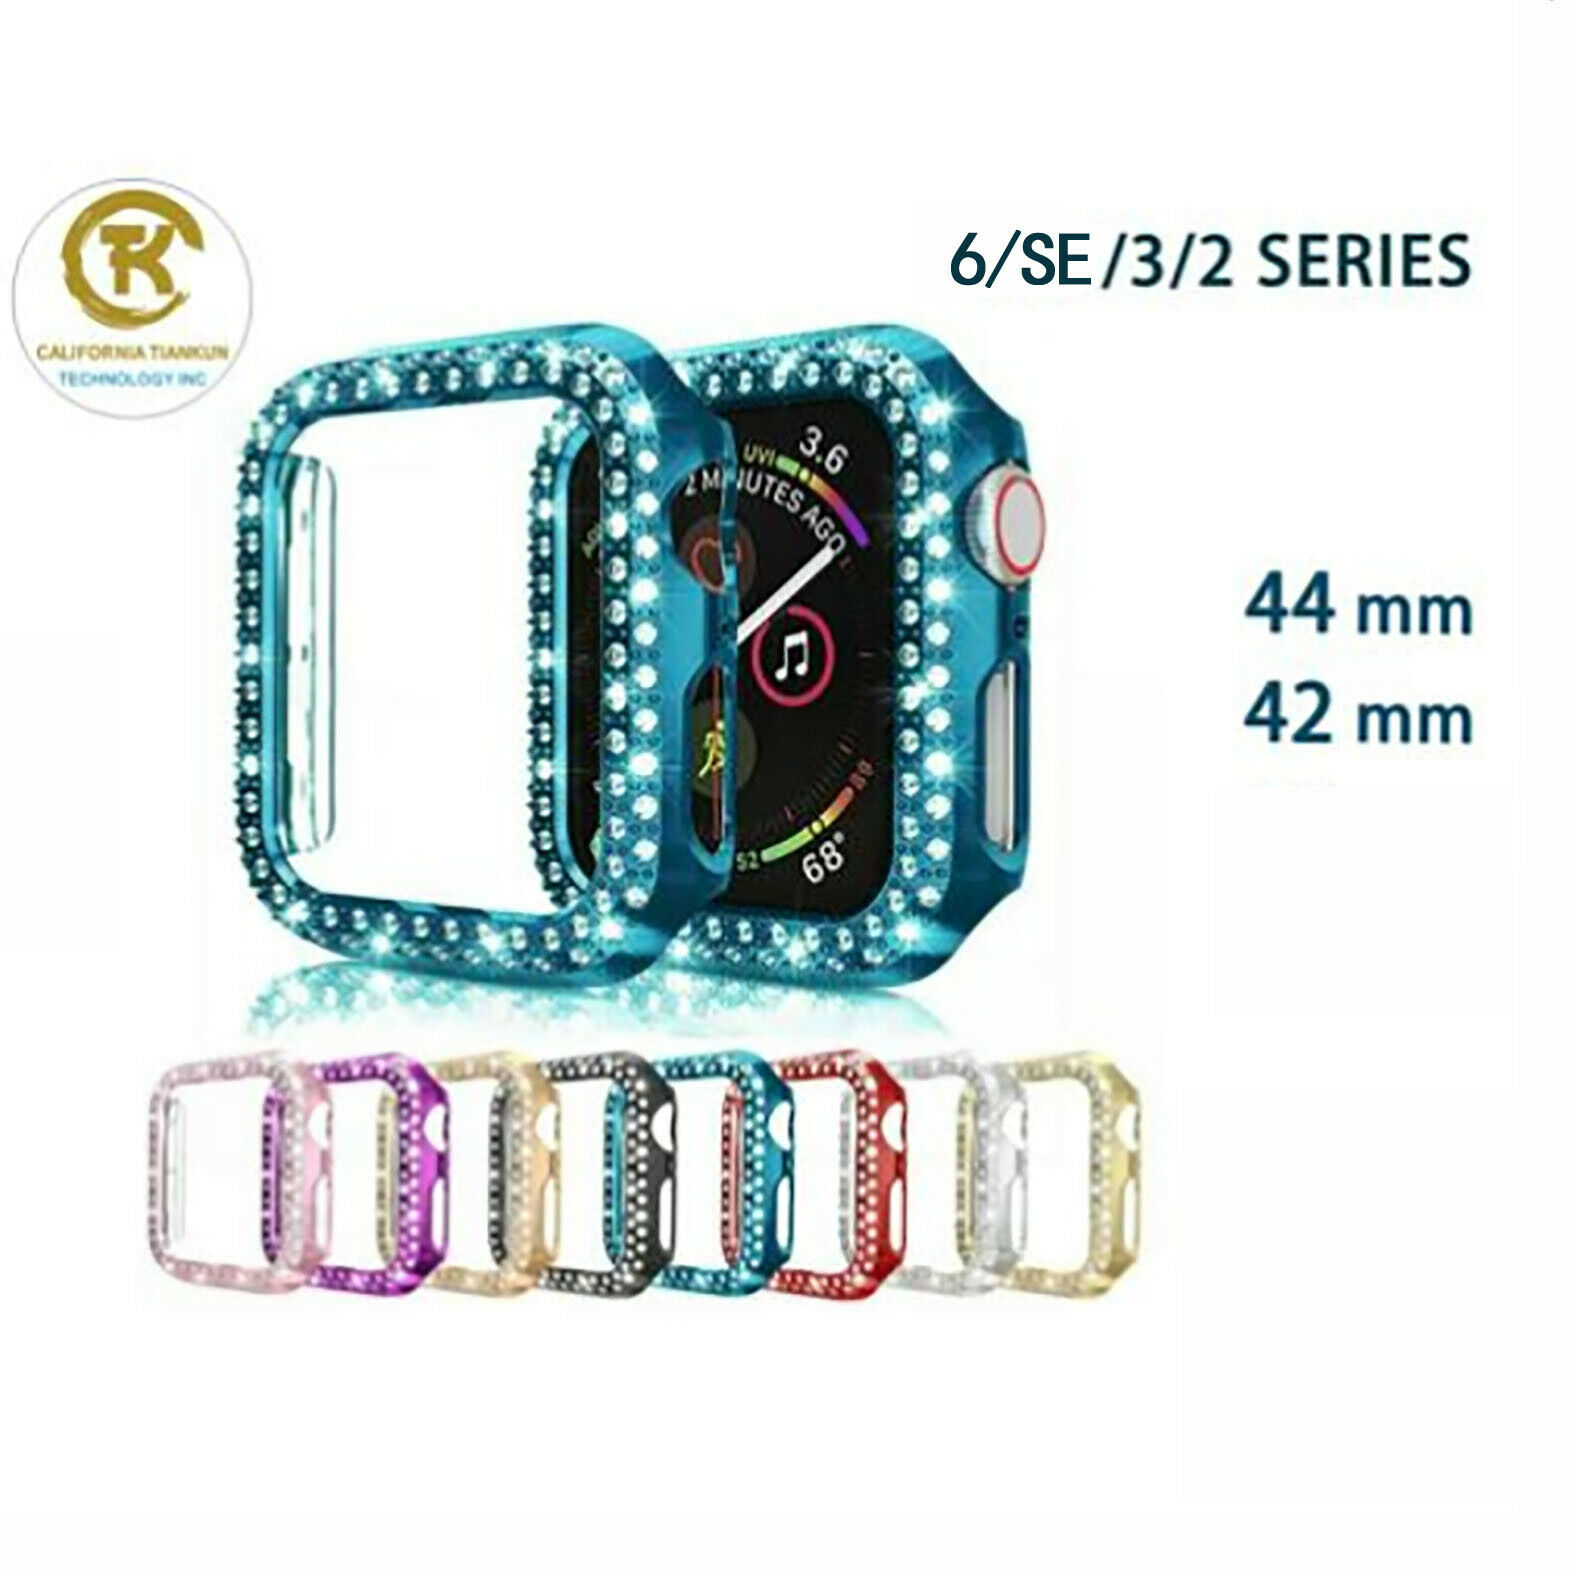 Suitable for Apple Watch Series 6/5 shiny crystal diamond 1/PK hard bumper cover